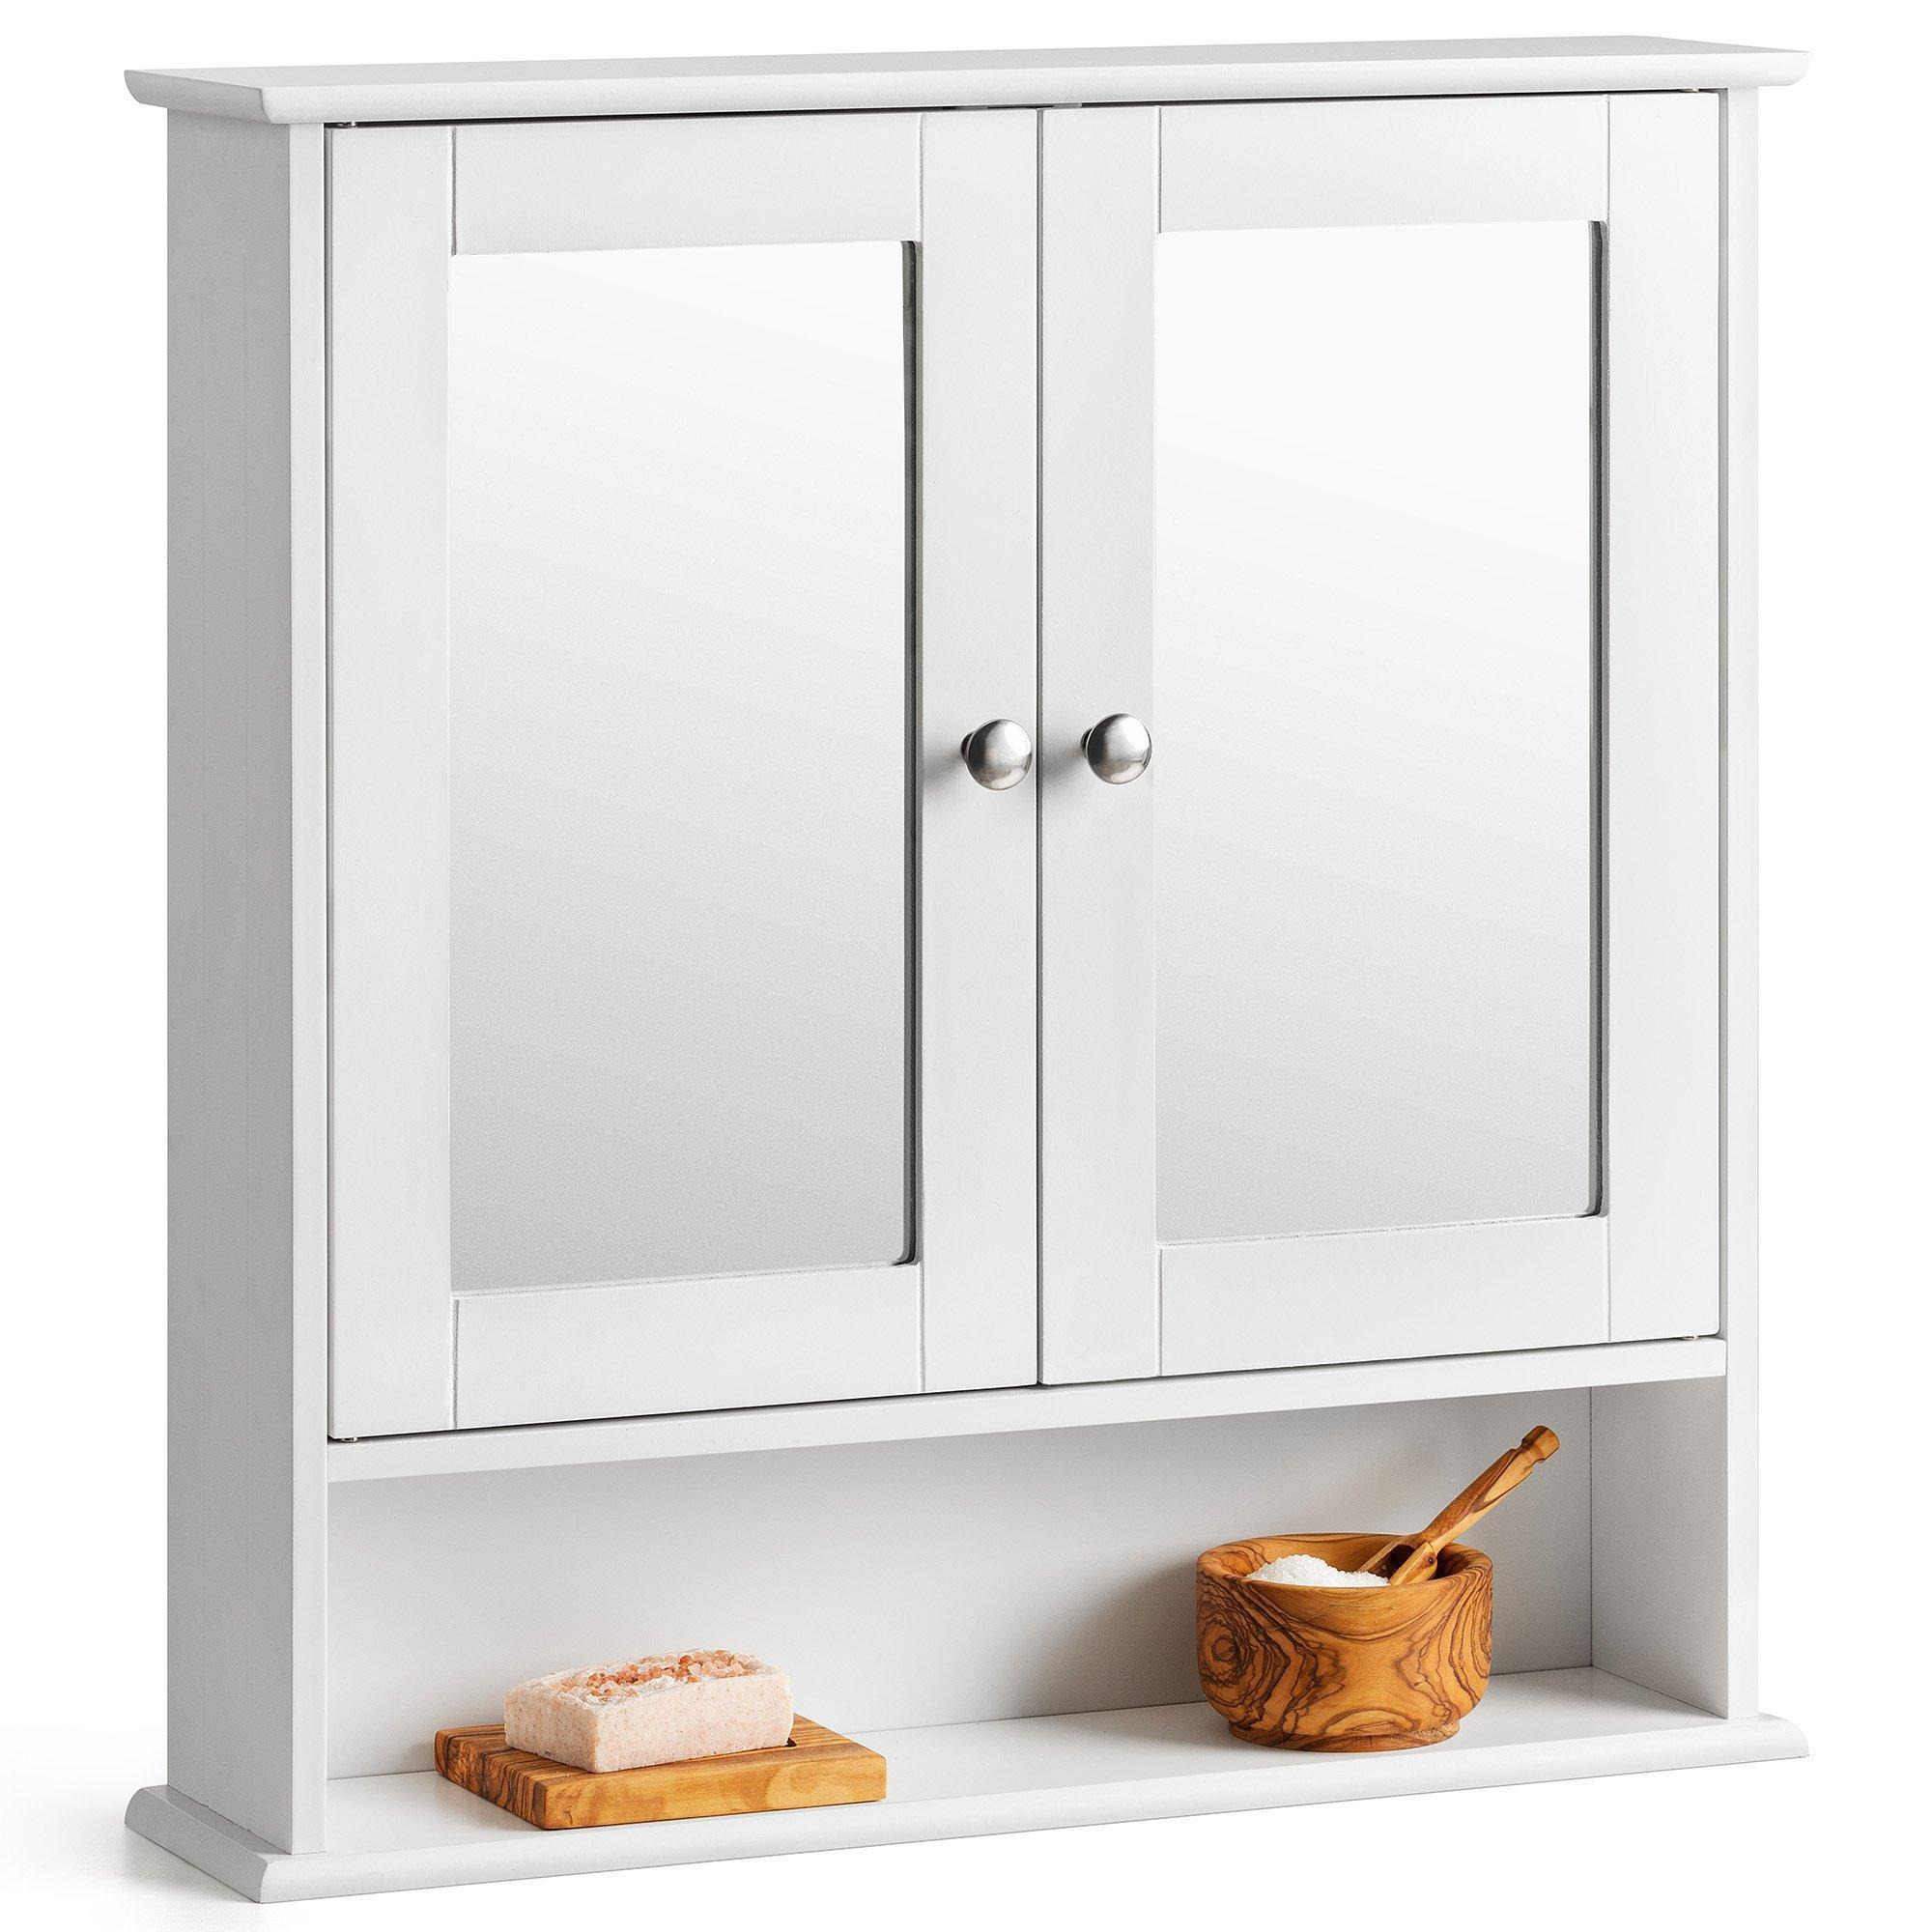 Bathroom Mirrored Cabinet White Grey Wooden Double Wall Mounted Storage Unit - image 1